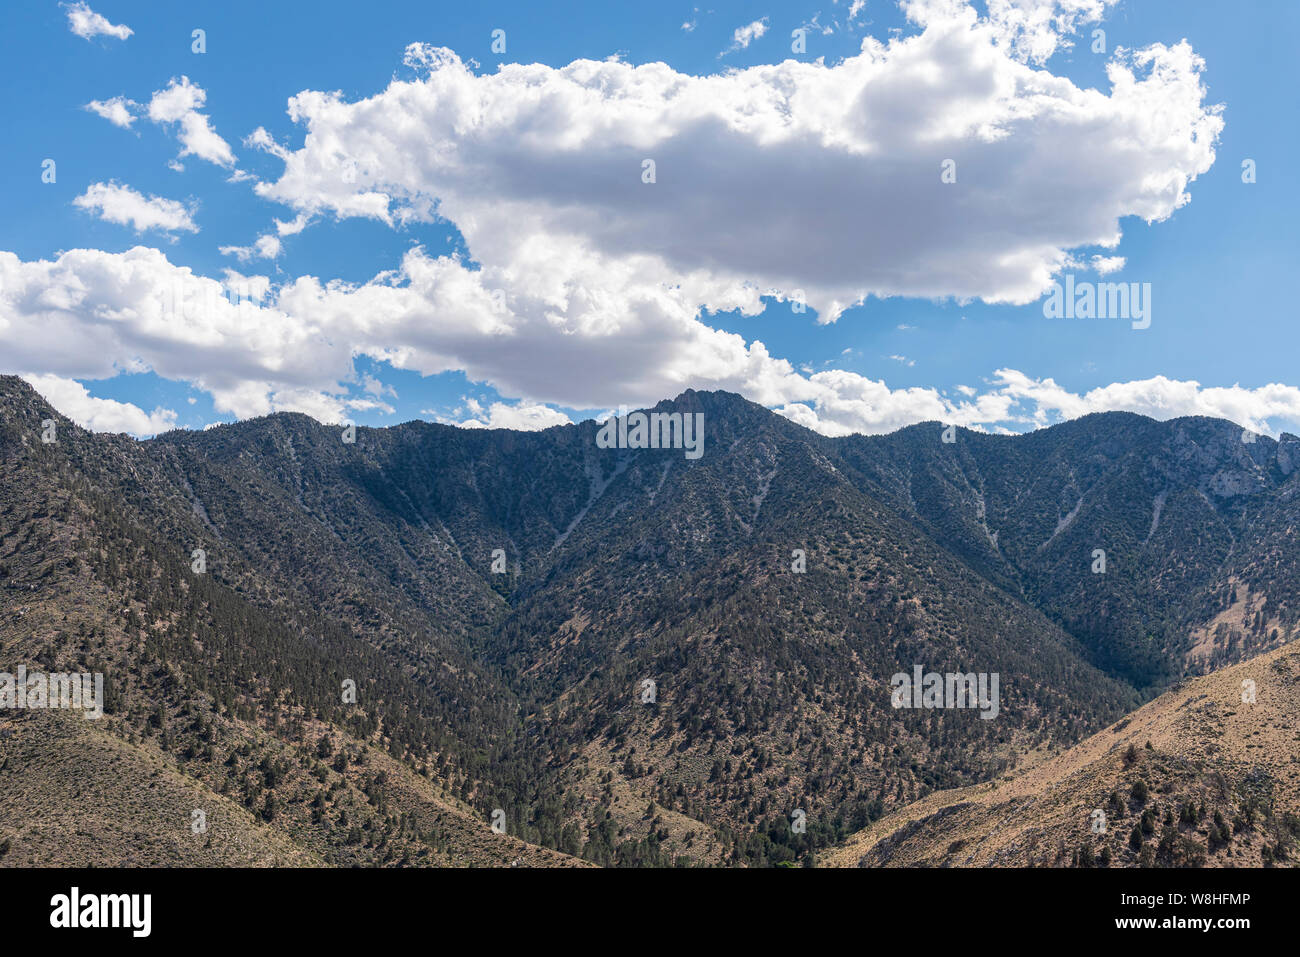 Mountains with green foliage and brown mountainsides under bright blue sky with white clouds. Stock Photo